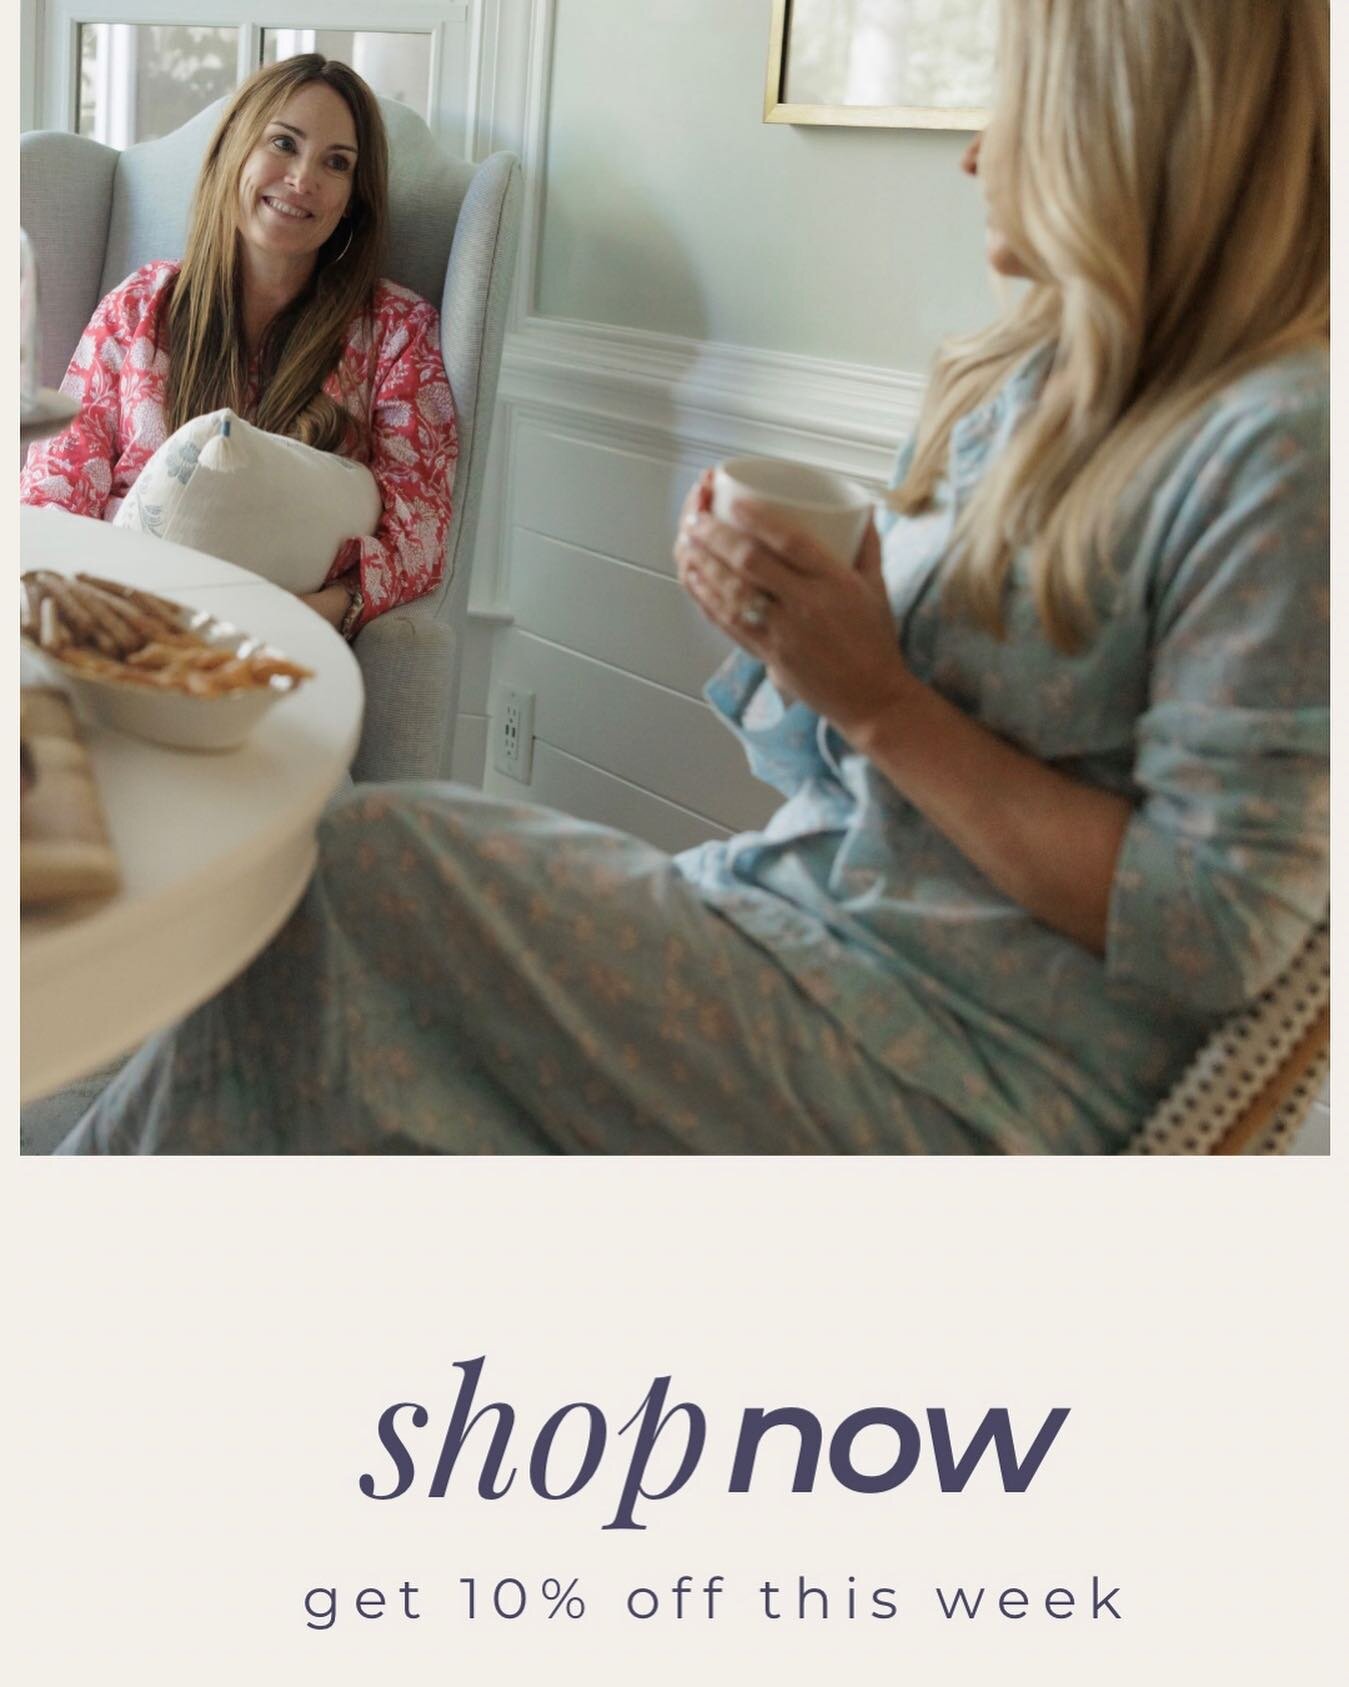 This Mother&rsquo;s Day, indulge in some much needed relaxation with the lightweight comfort of Hendley&rsquo;s 100% cotton pajamas! #cottonpajamas #treatyourself #selfcare #hendleypajamas #mothersday #selfcaresunday